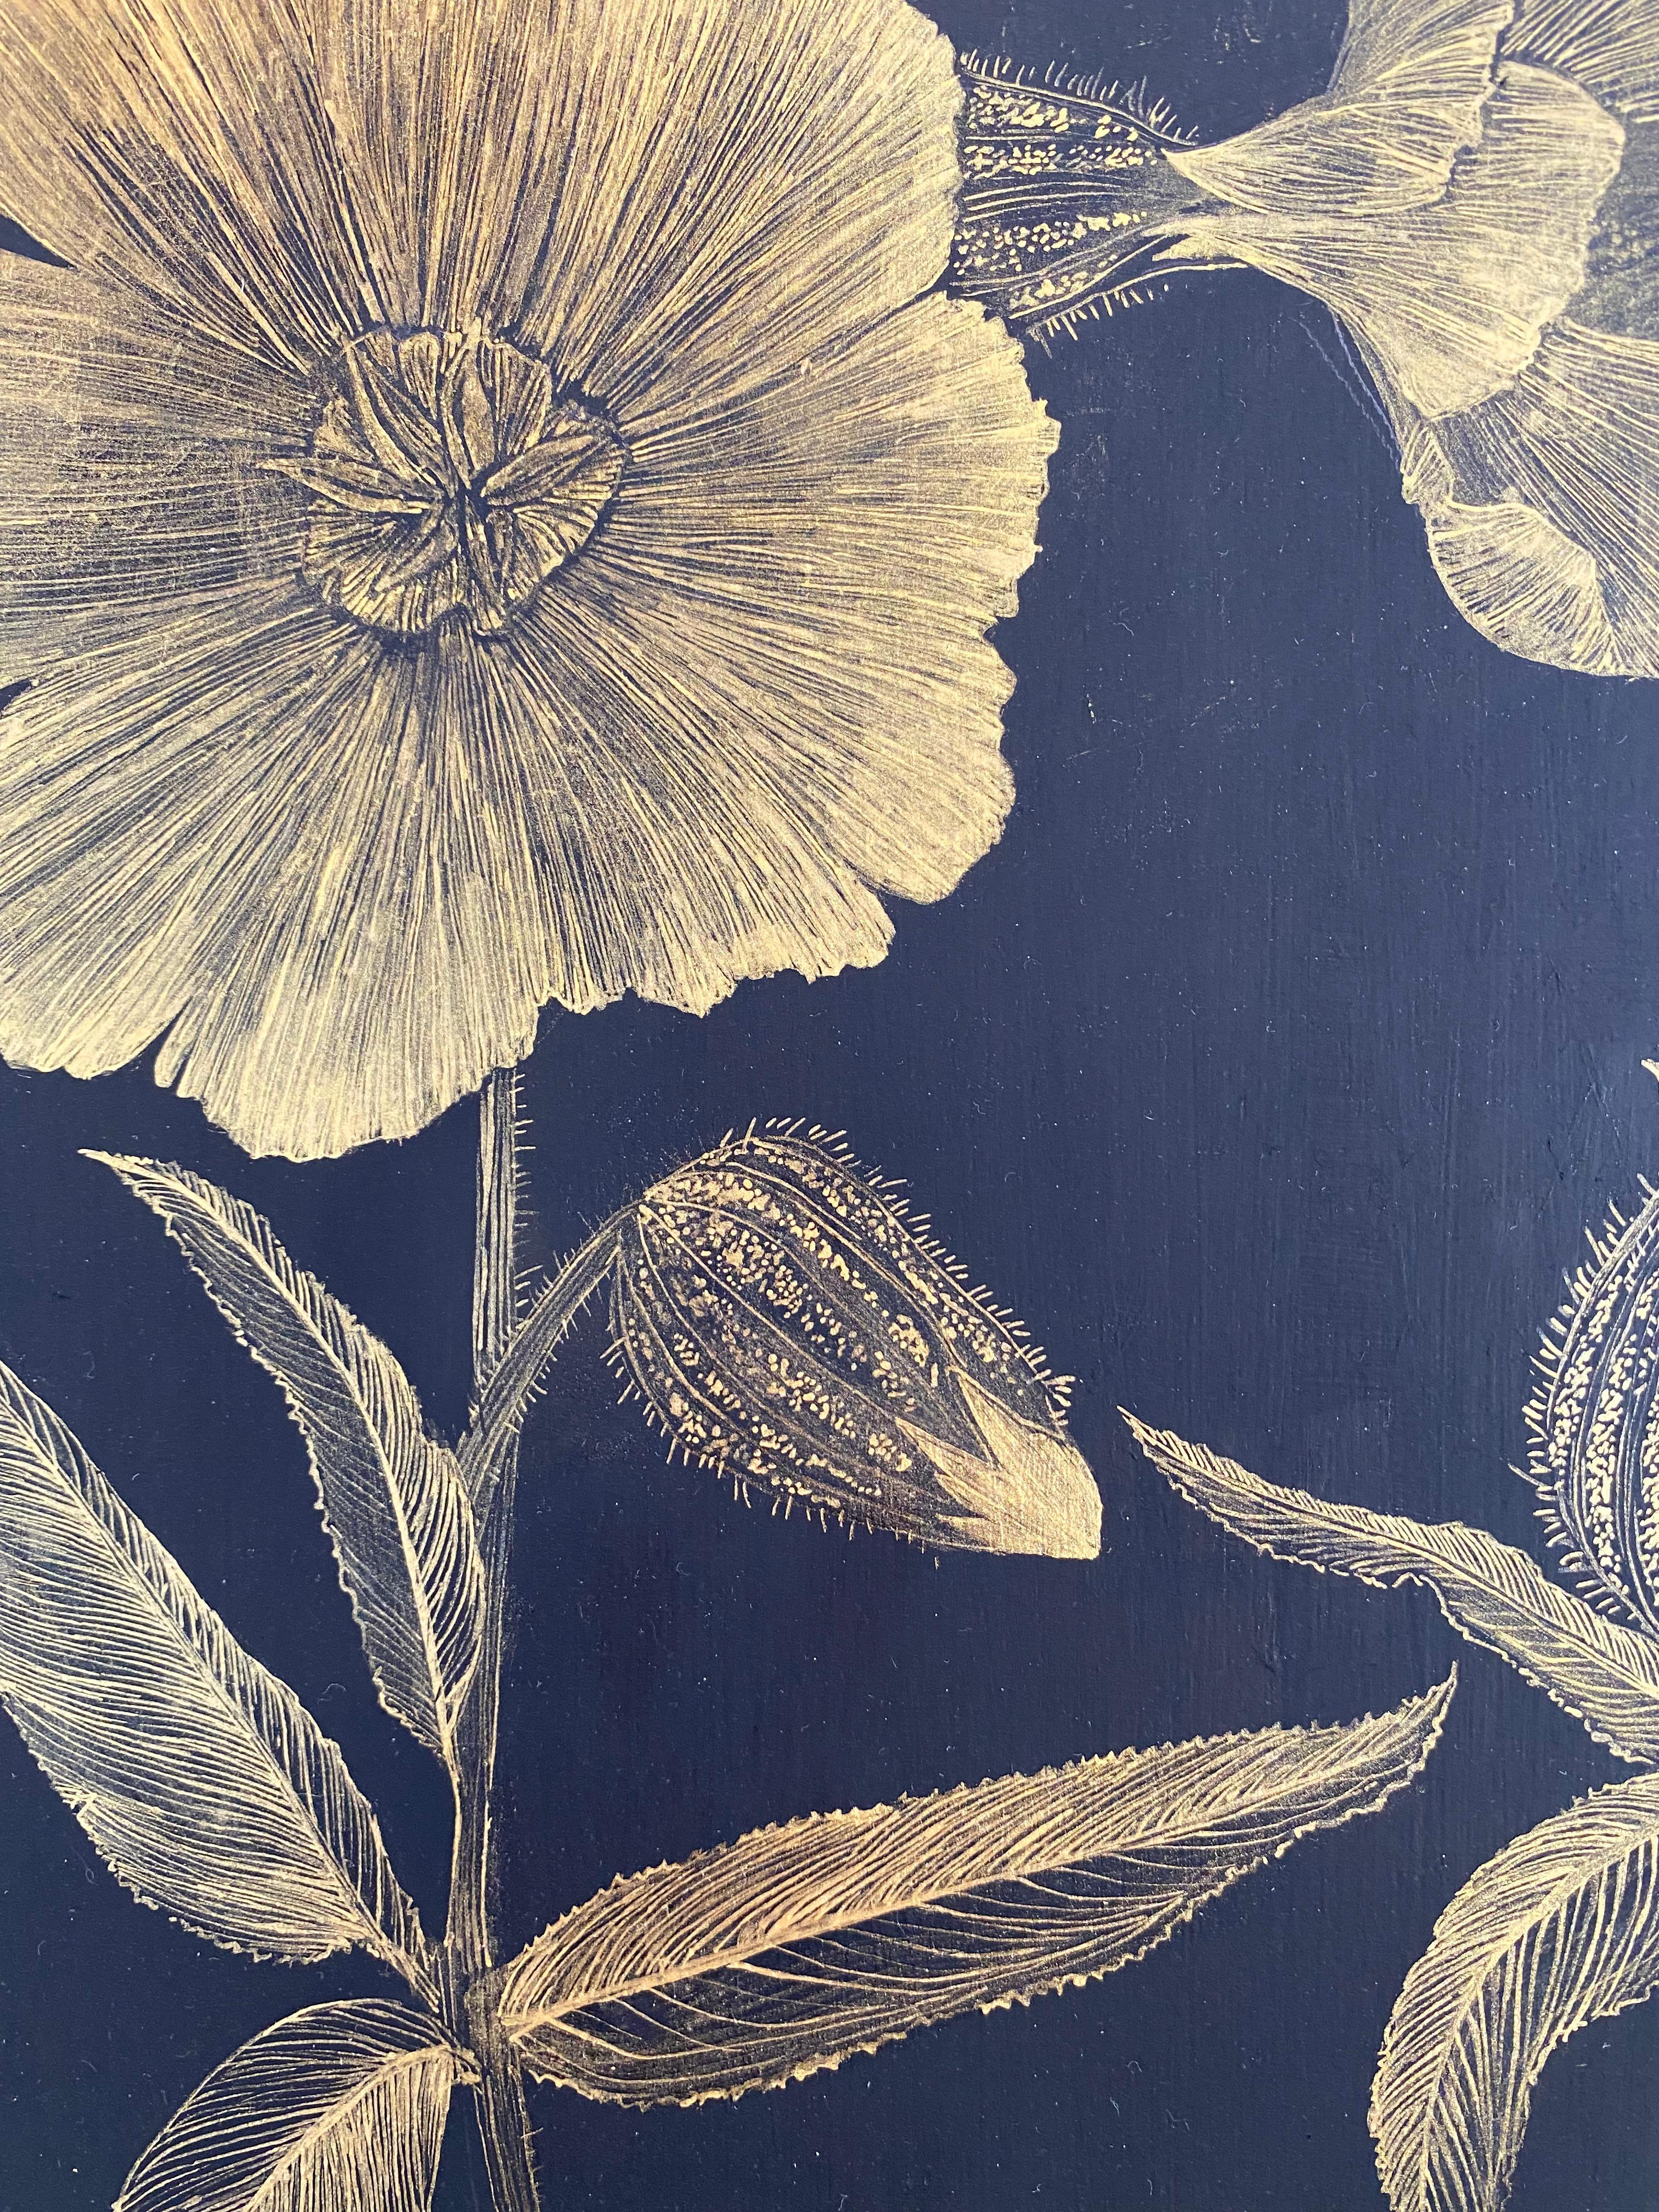 Marshmallow Two, Gold Flowers, Leaves Stem, Metallic Botanical Painting on Black For Sale 4